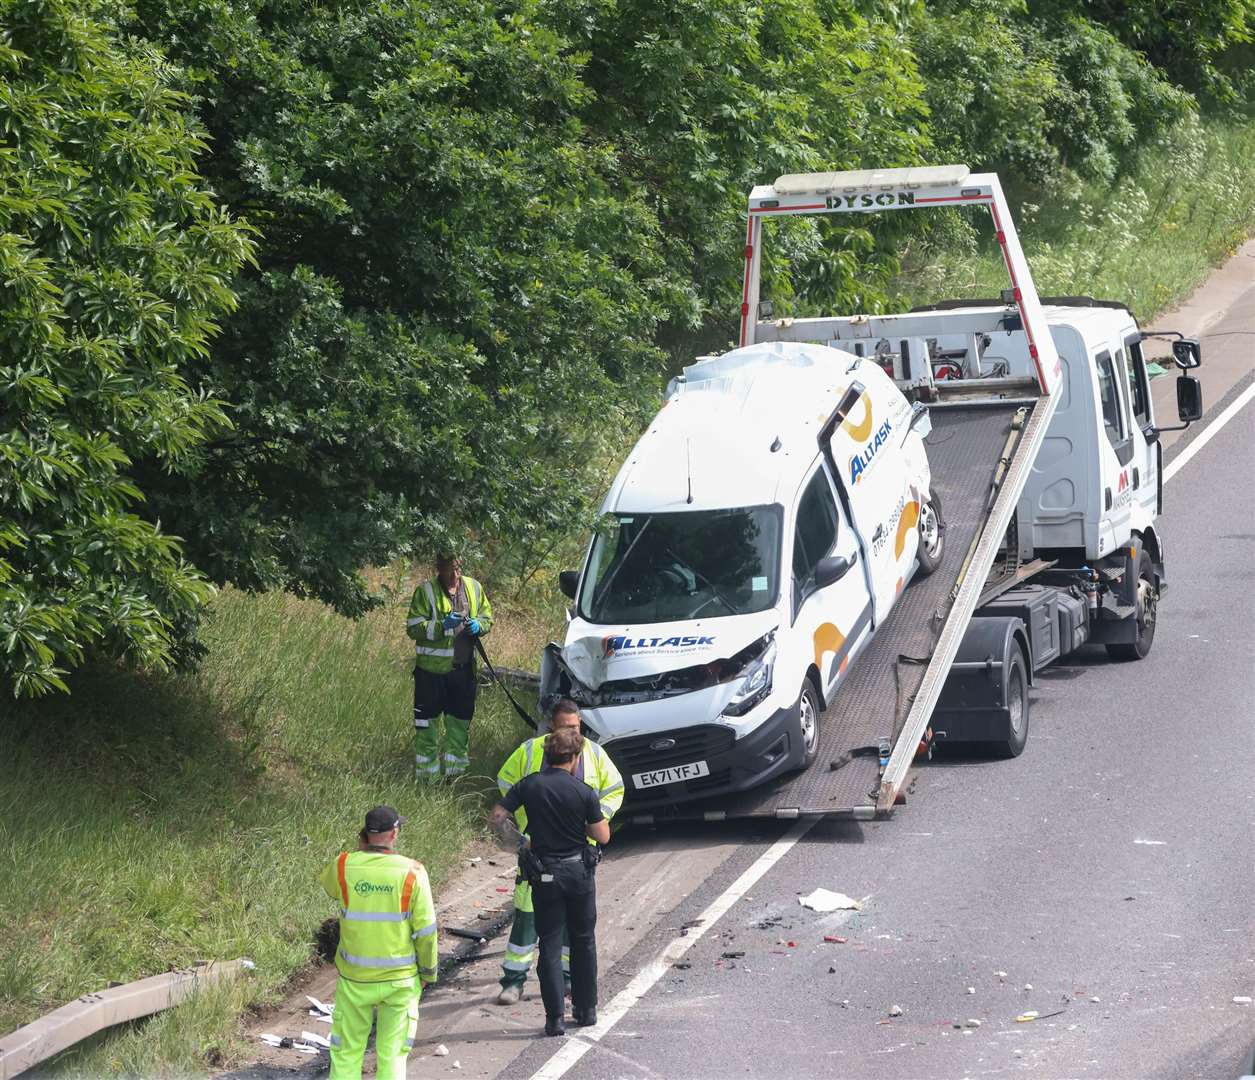 A van is recovered from the A249 at Bobbing after a lorry crash closed the Sheppey-bound carriageway. Two people were injured. Picture: UKNIP